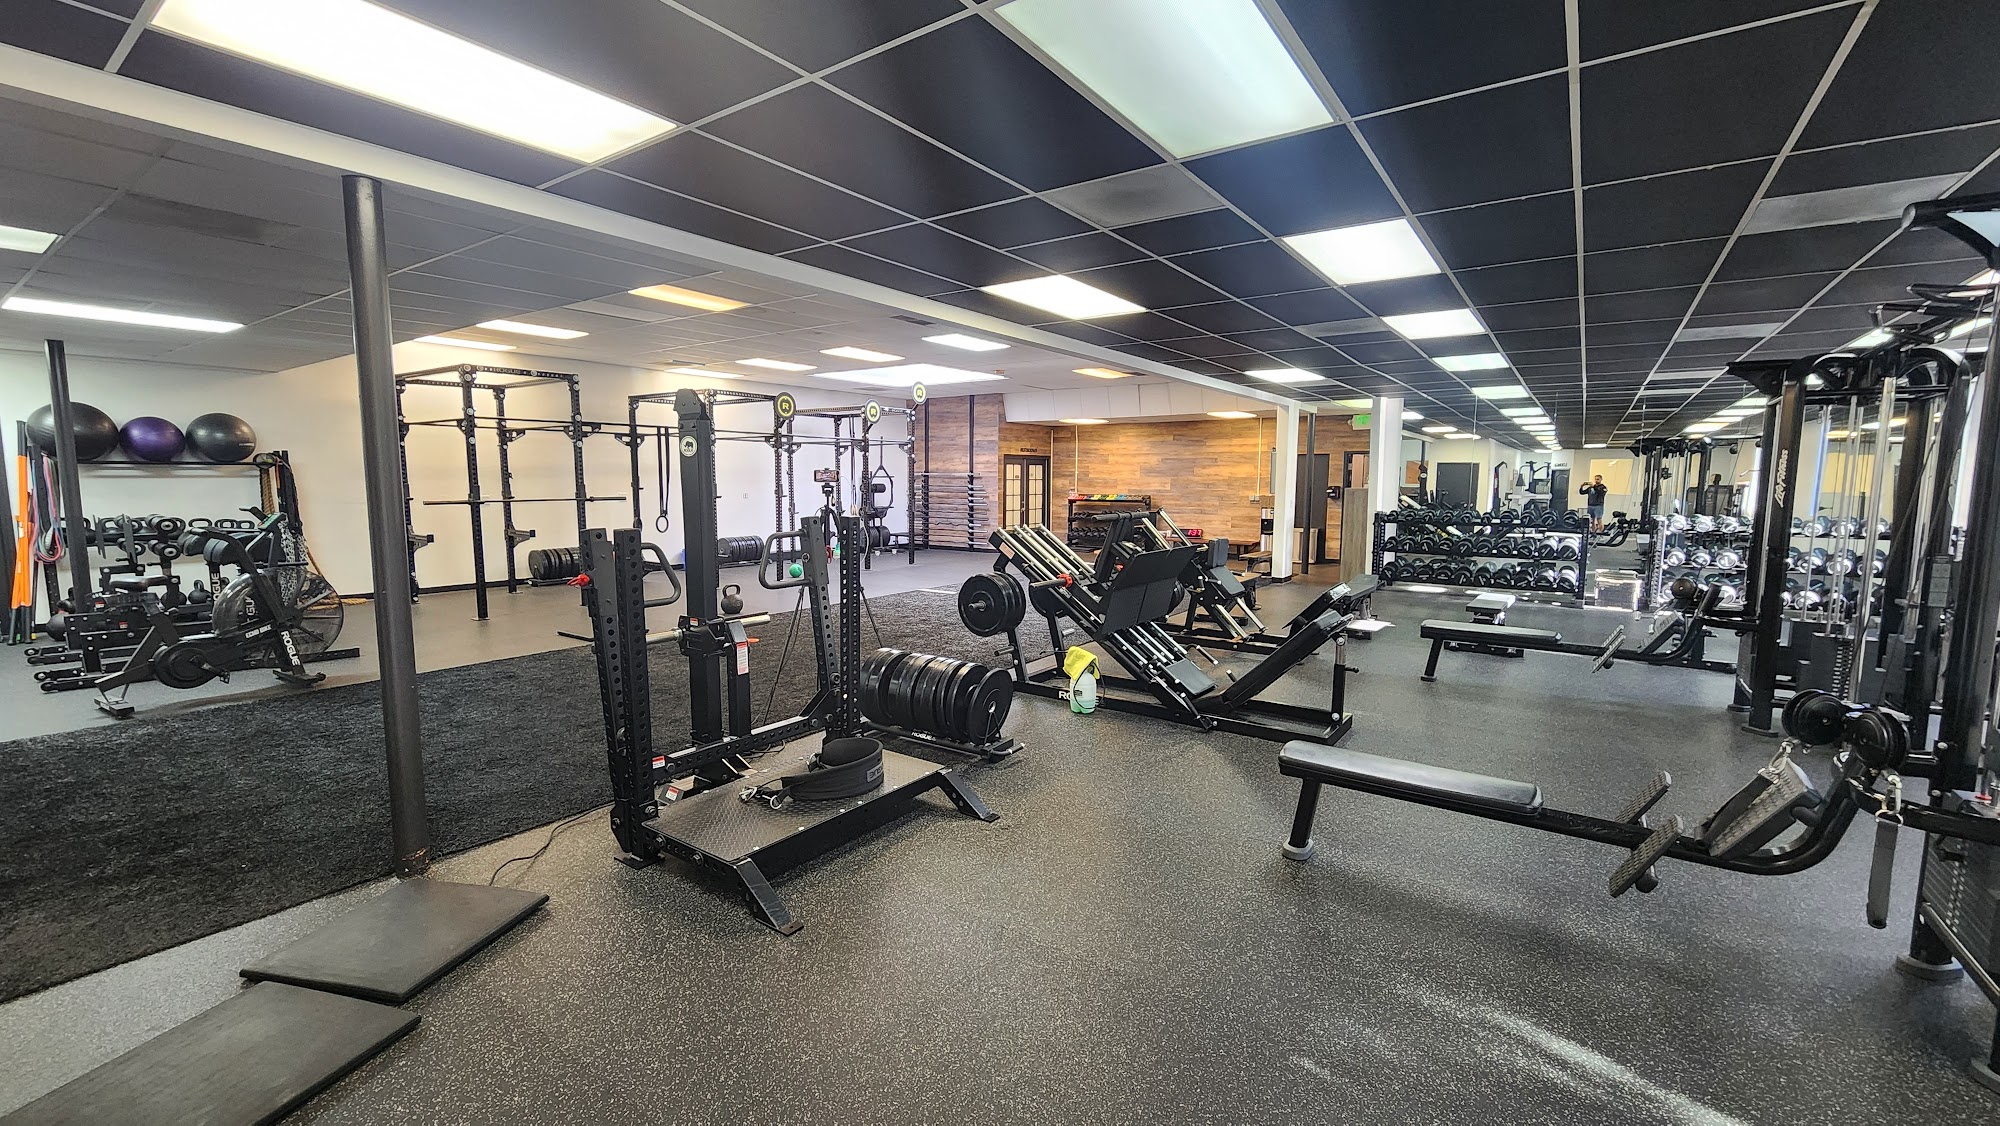 Silicon Valley Athletics - Personal Trainer Sunnyvale